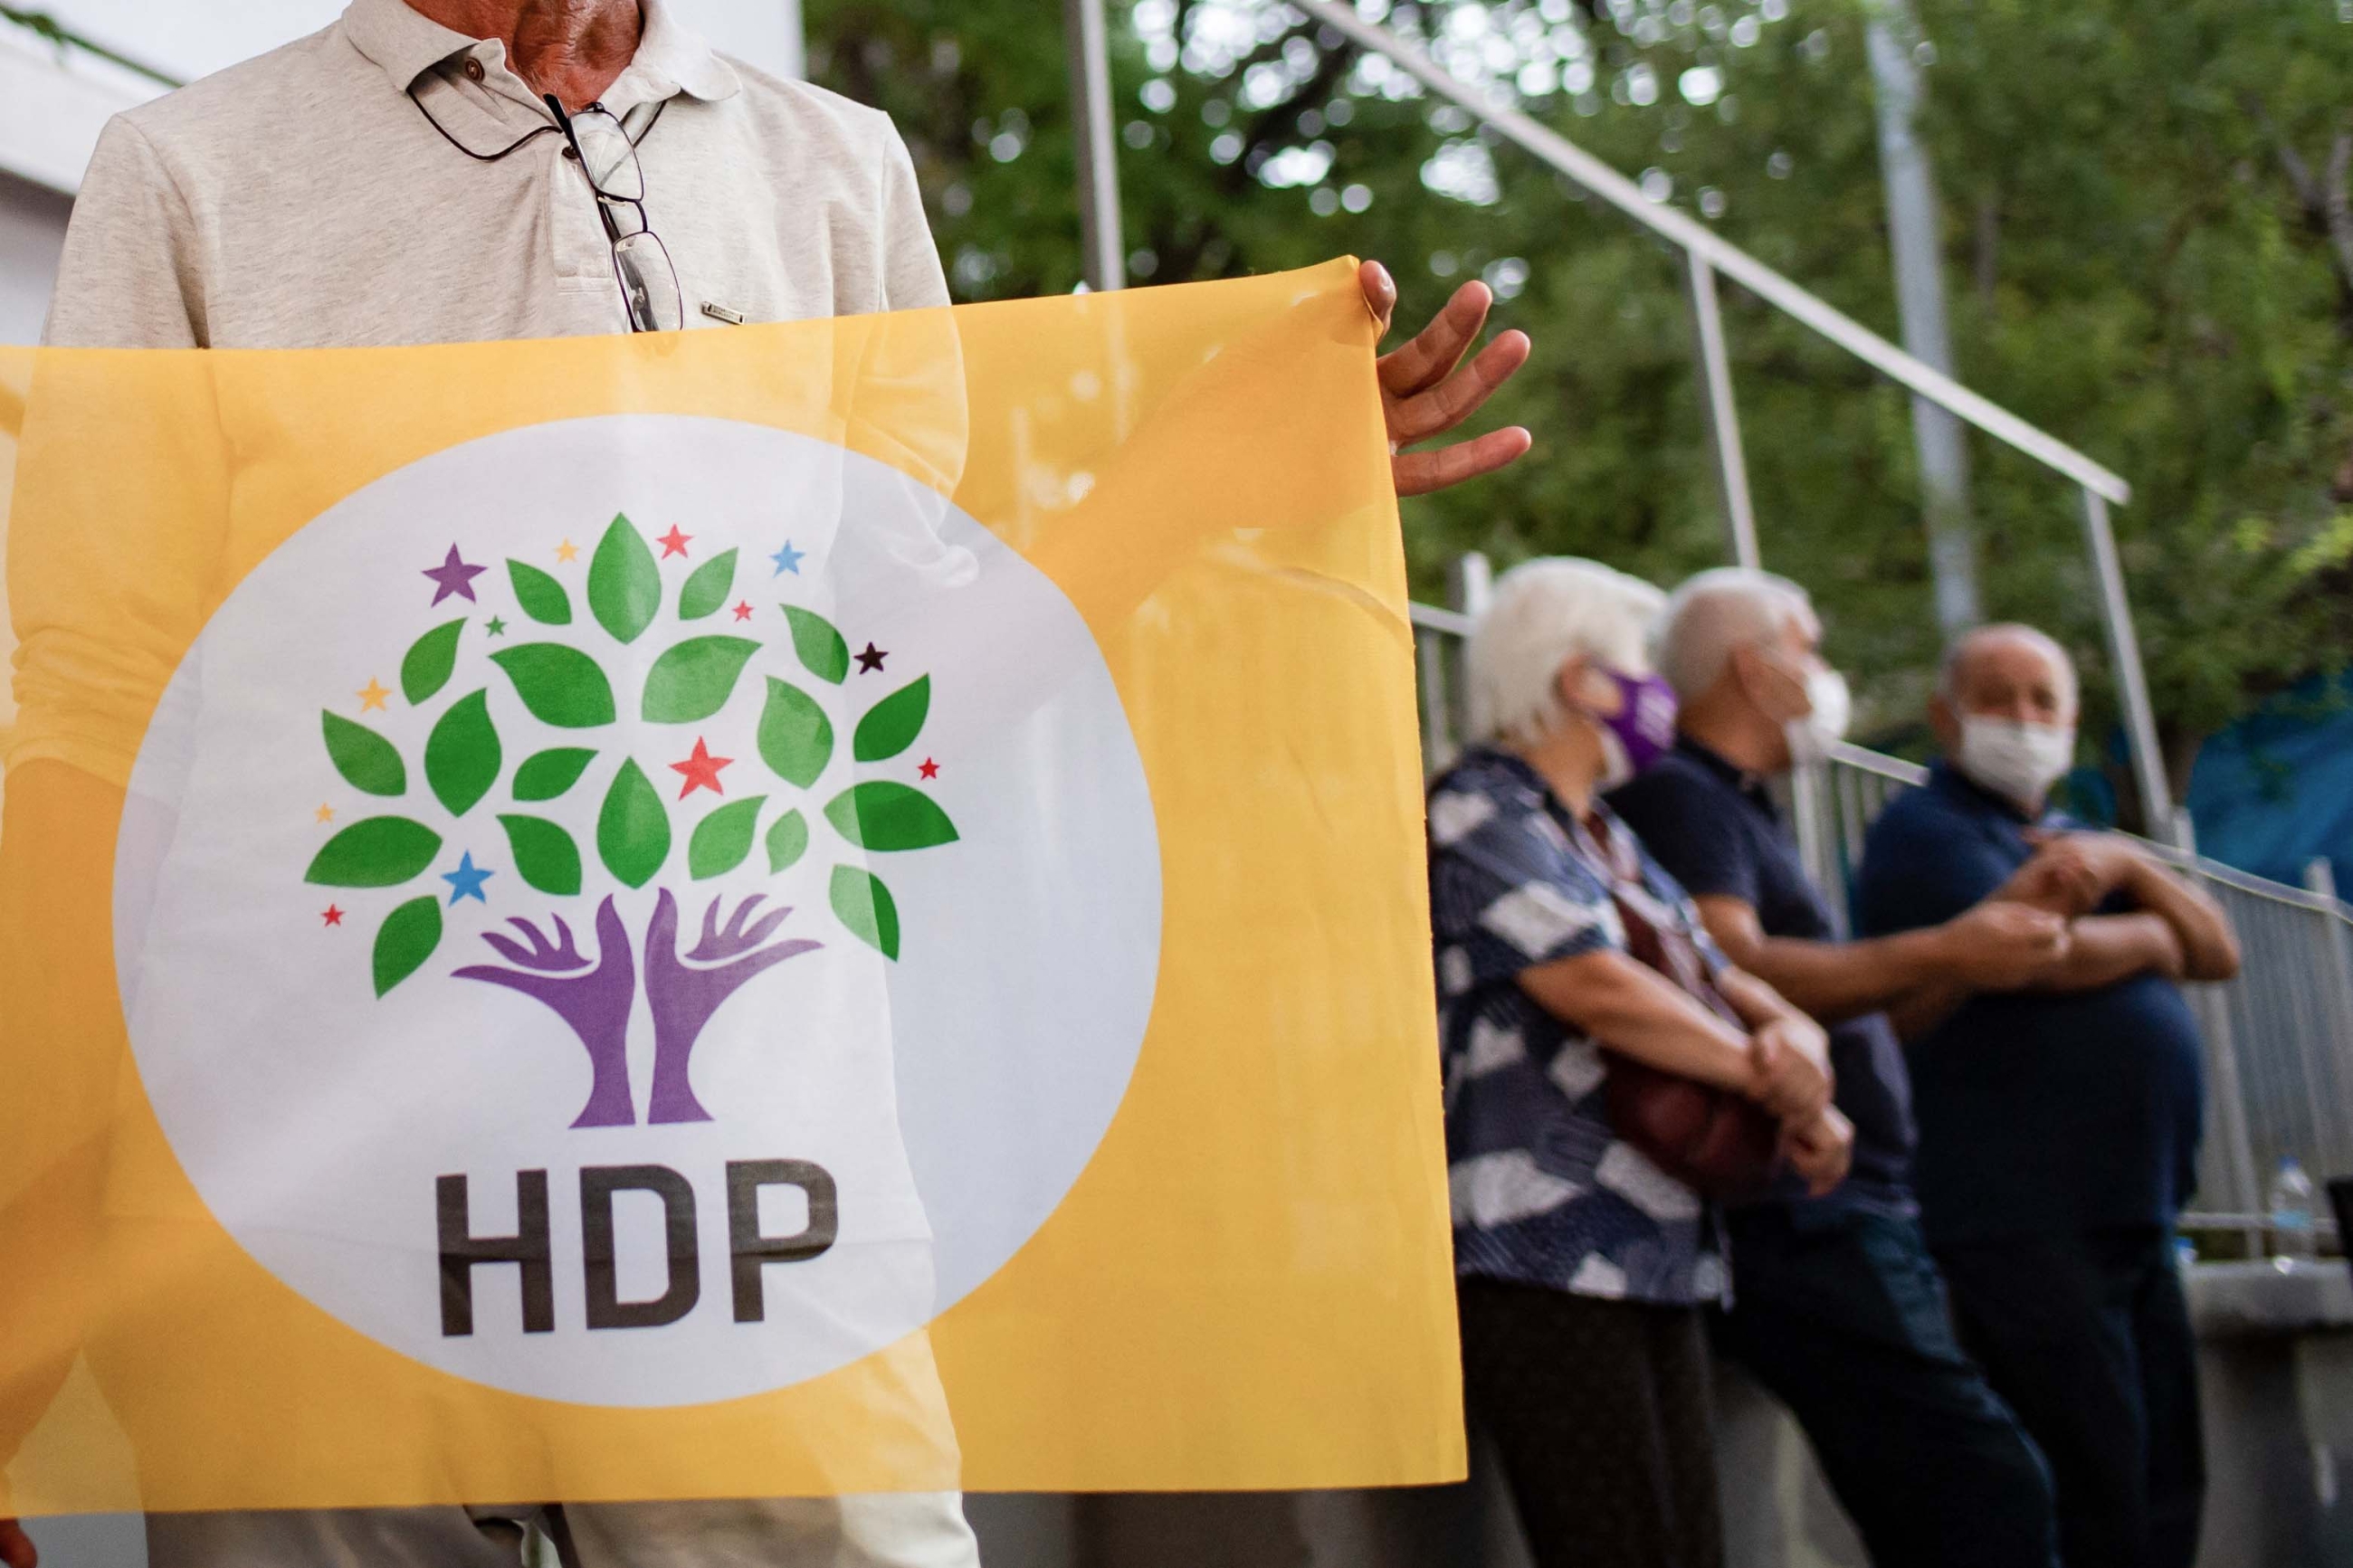 Over the past two years, the Turkish government has launched a crackdown on the HDP party.